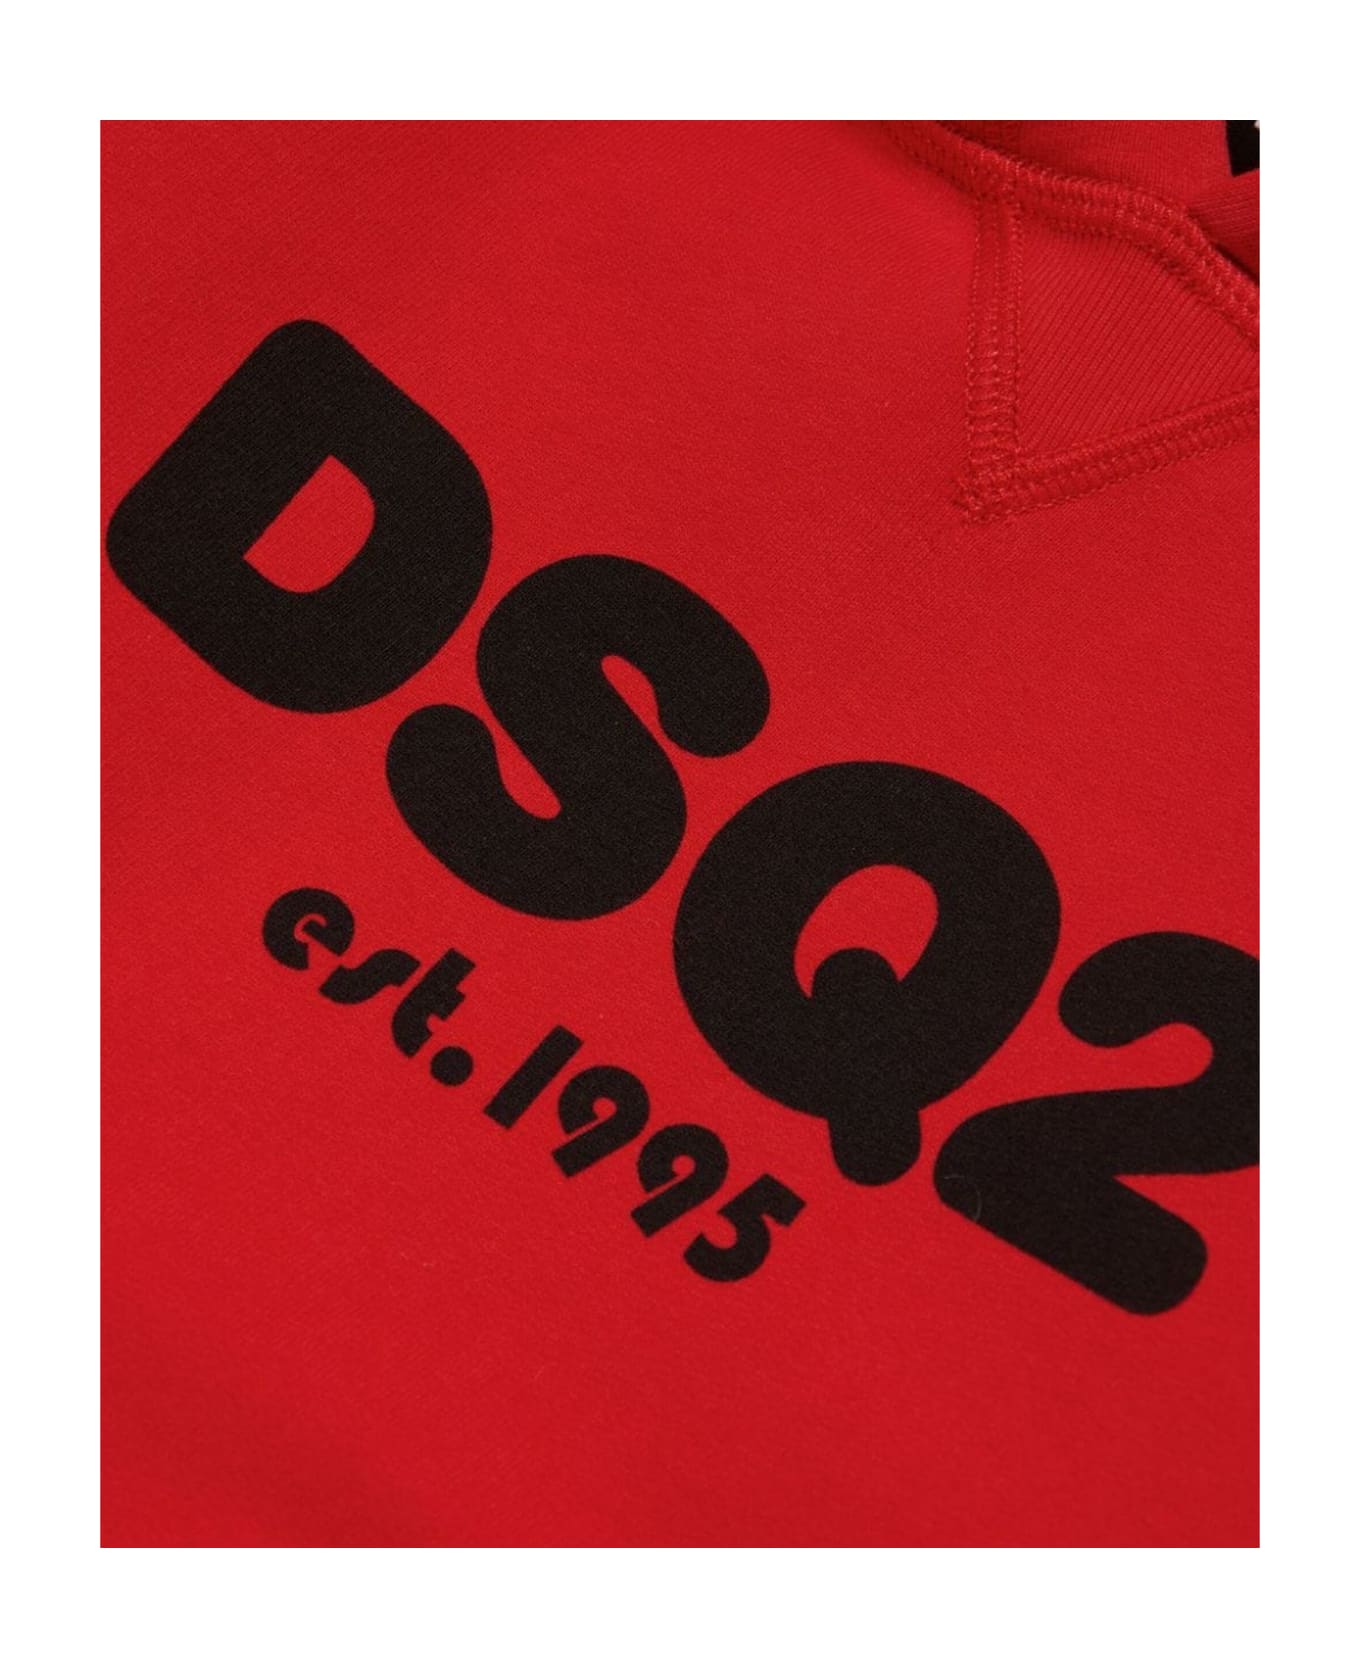 Dsquared2 Sweaters Red - Red